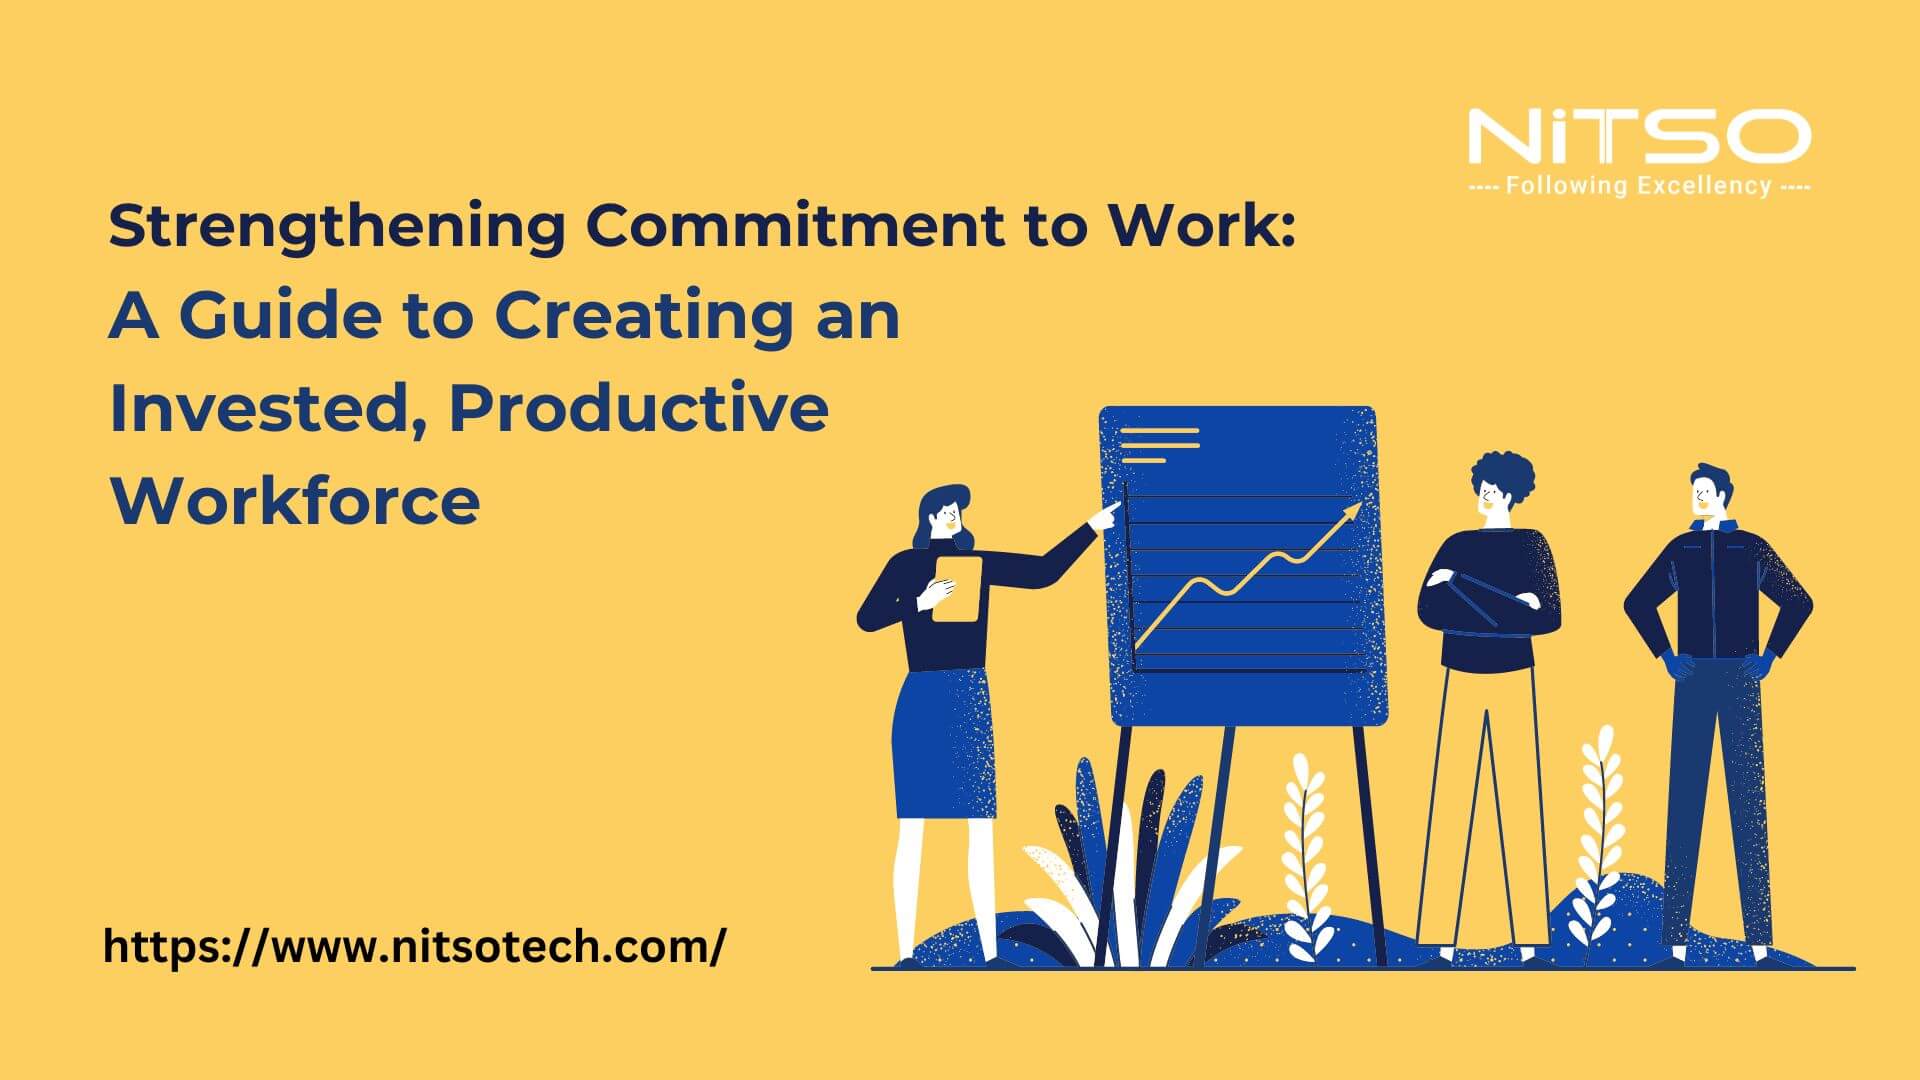 Improving Commitment to Work: Strategies to Build an Engaged Workforce